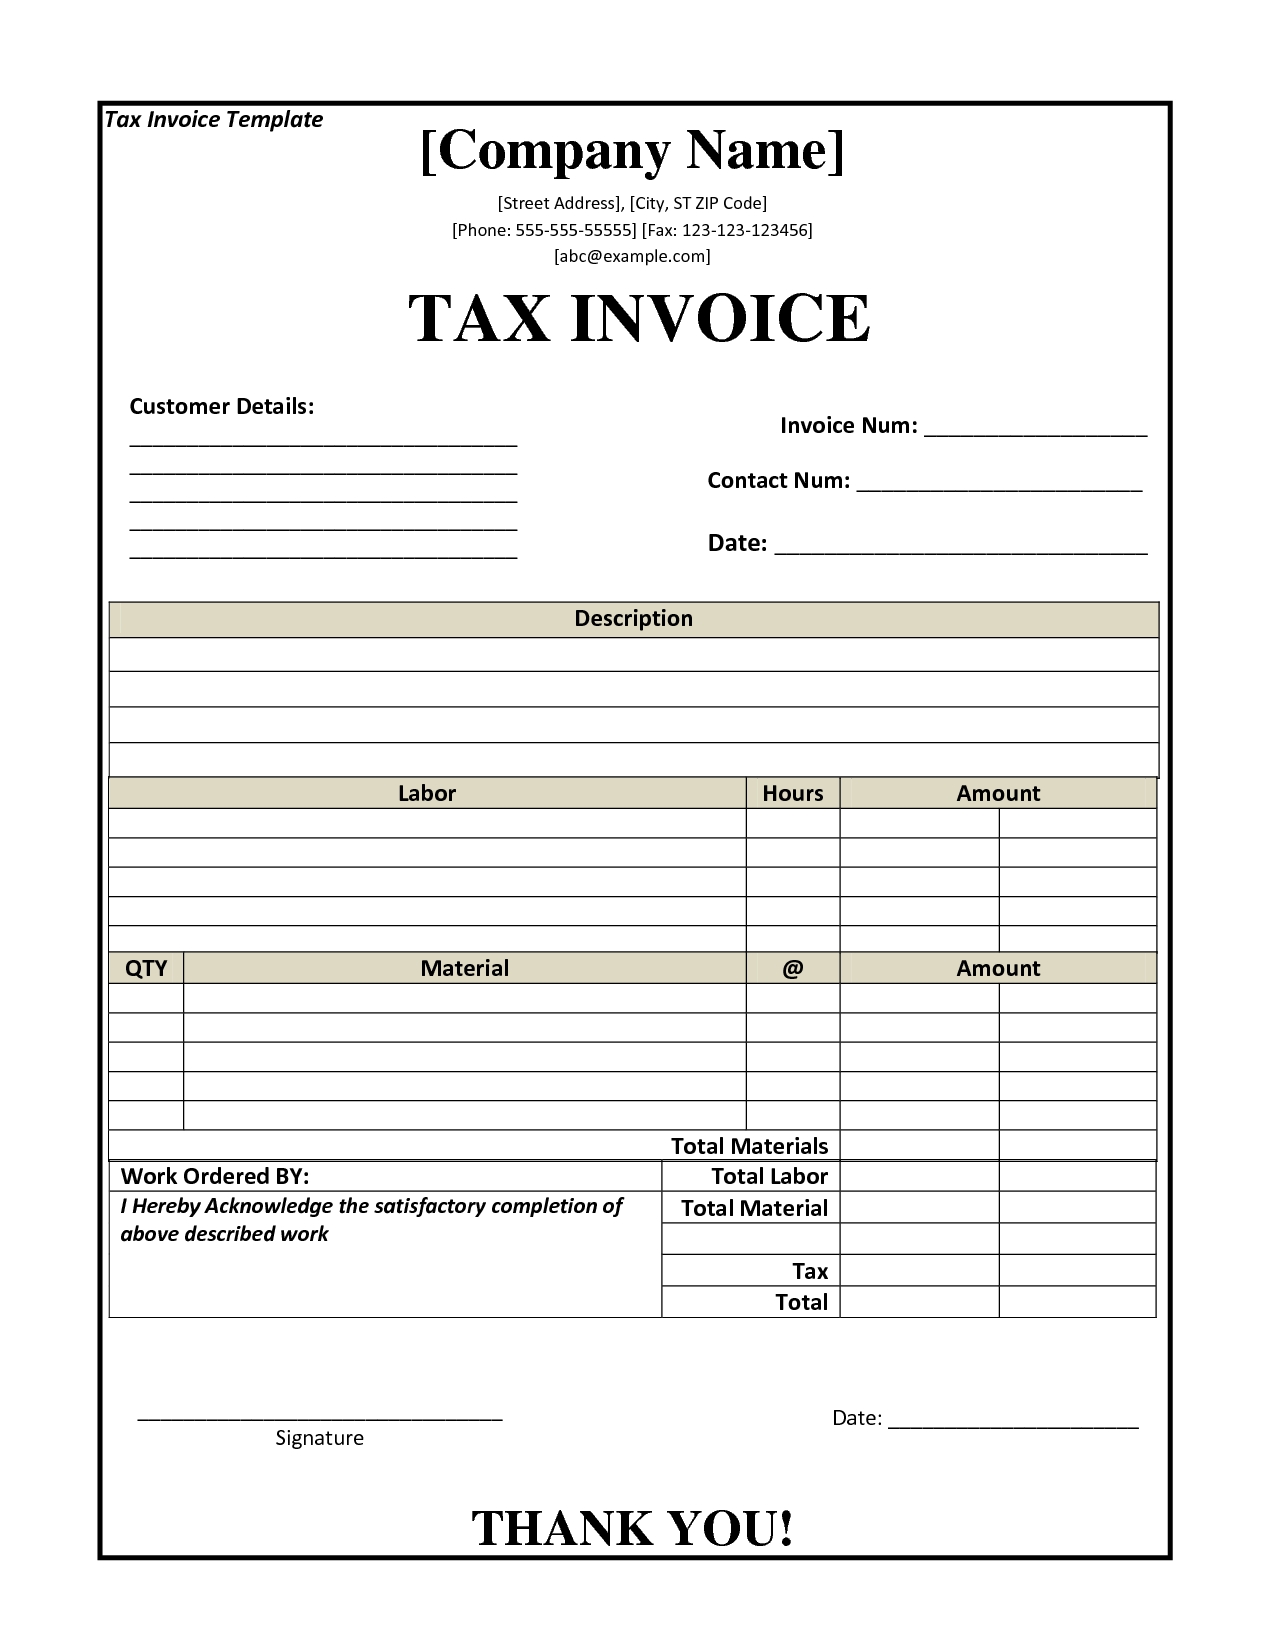 Tax Invoice Template Free Download Word